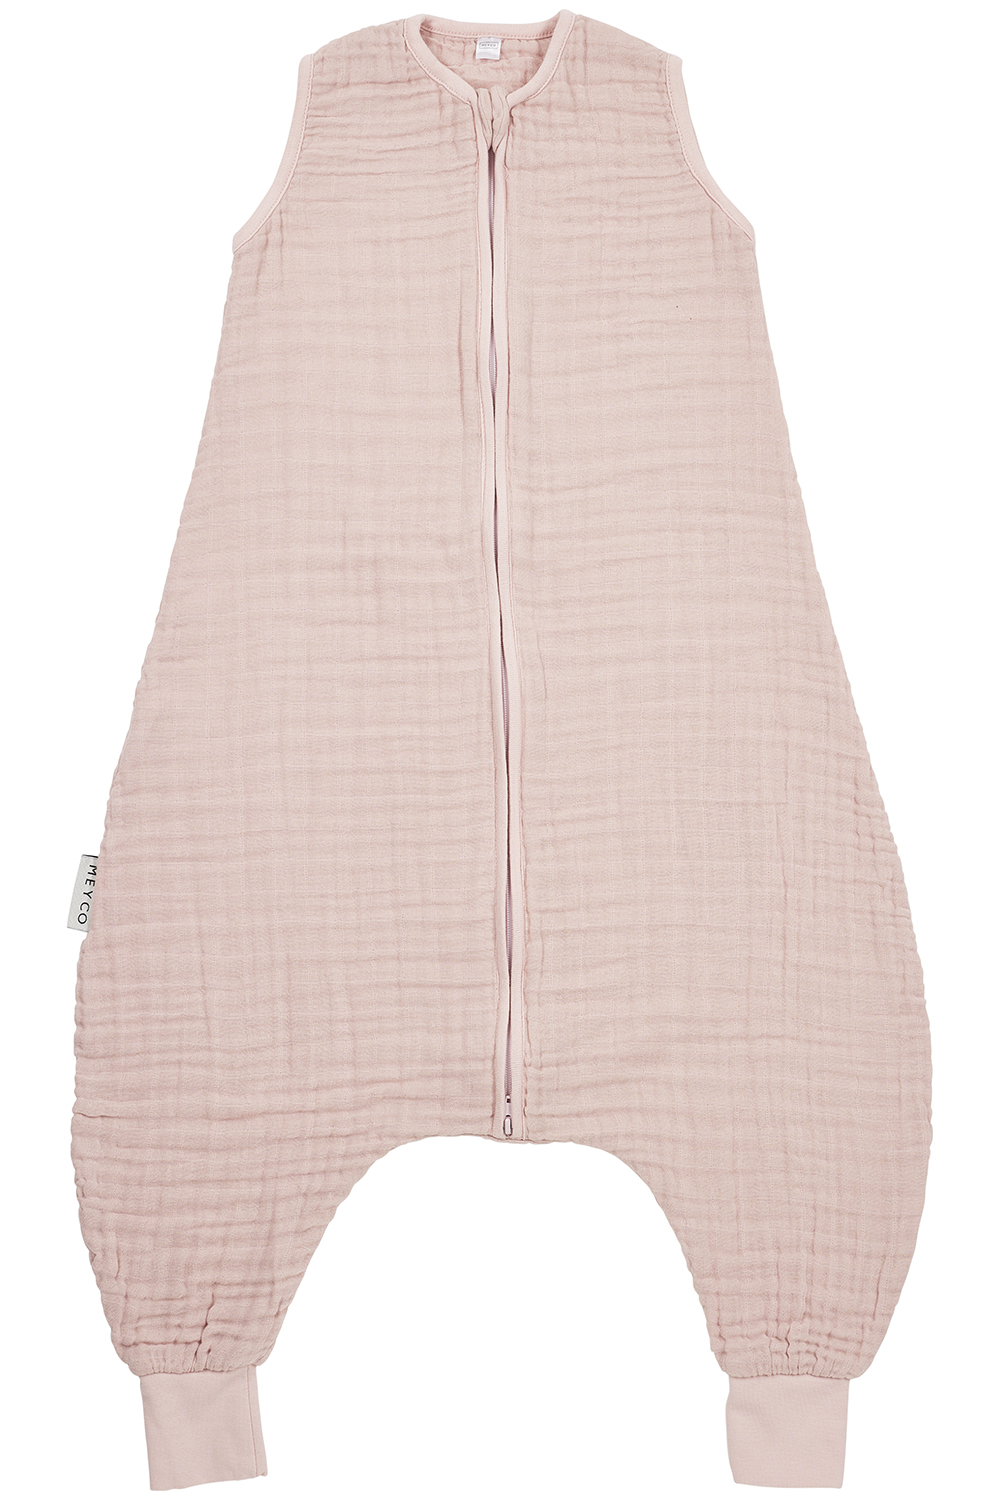 Baby sommer Schlafoverall Jumper pre-washed musselin Uni - soft pink - 92cm